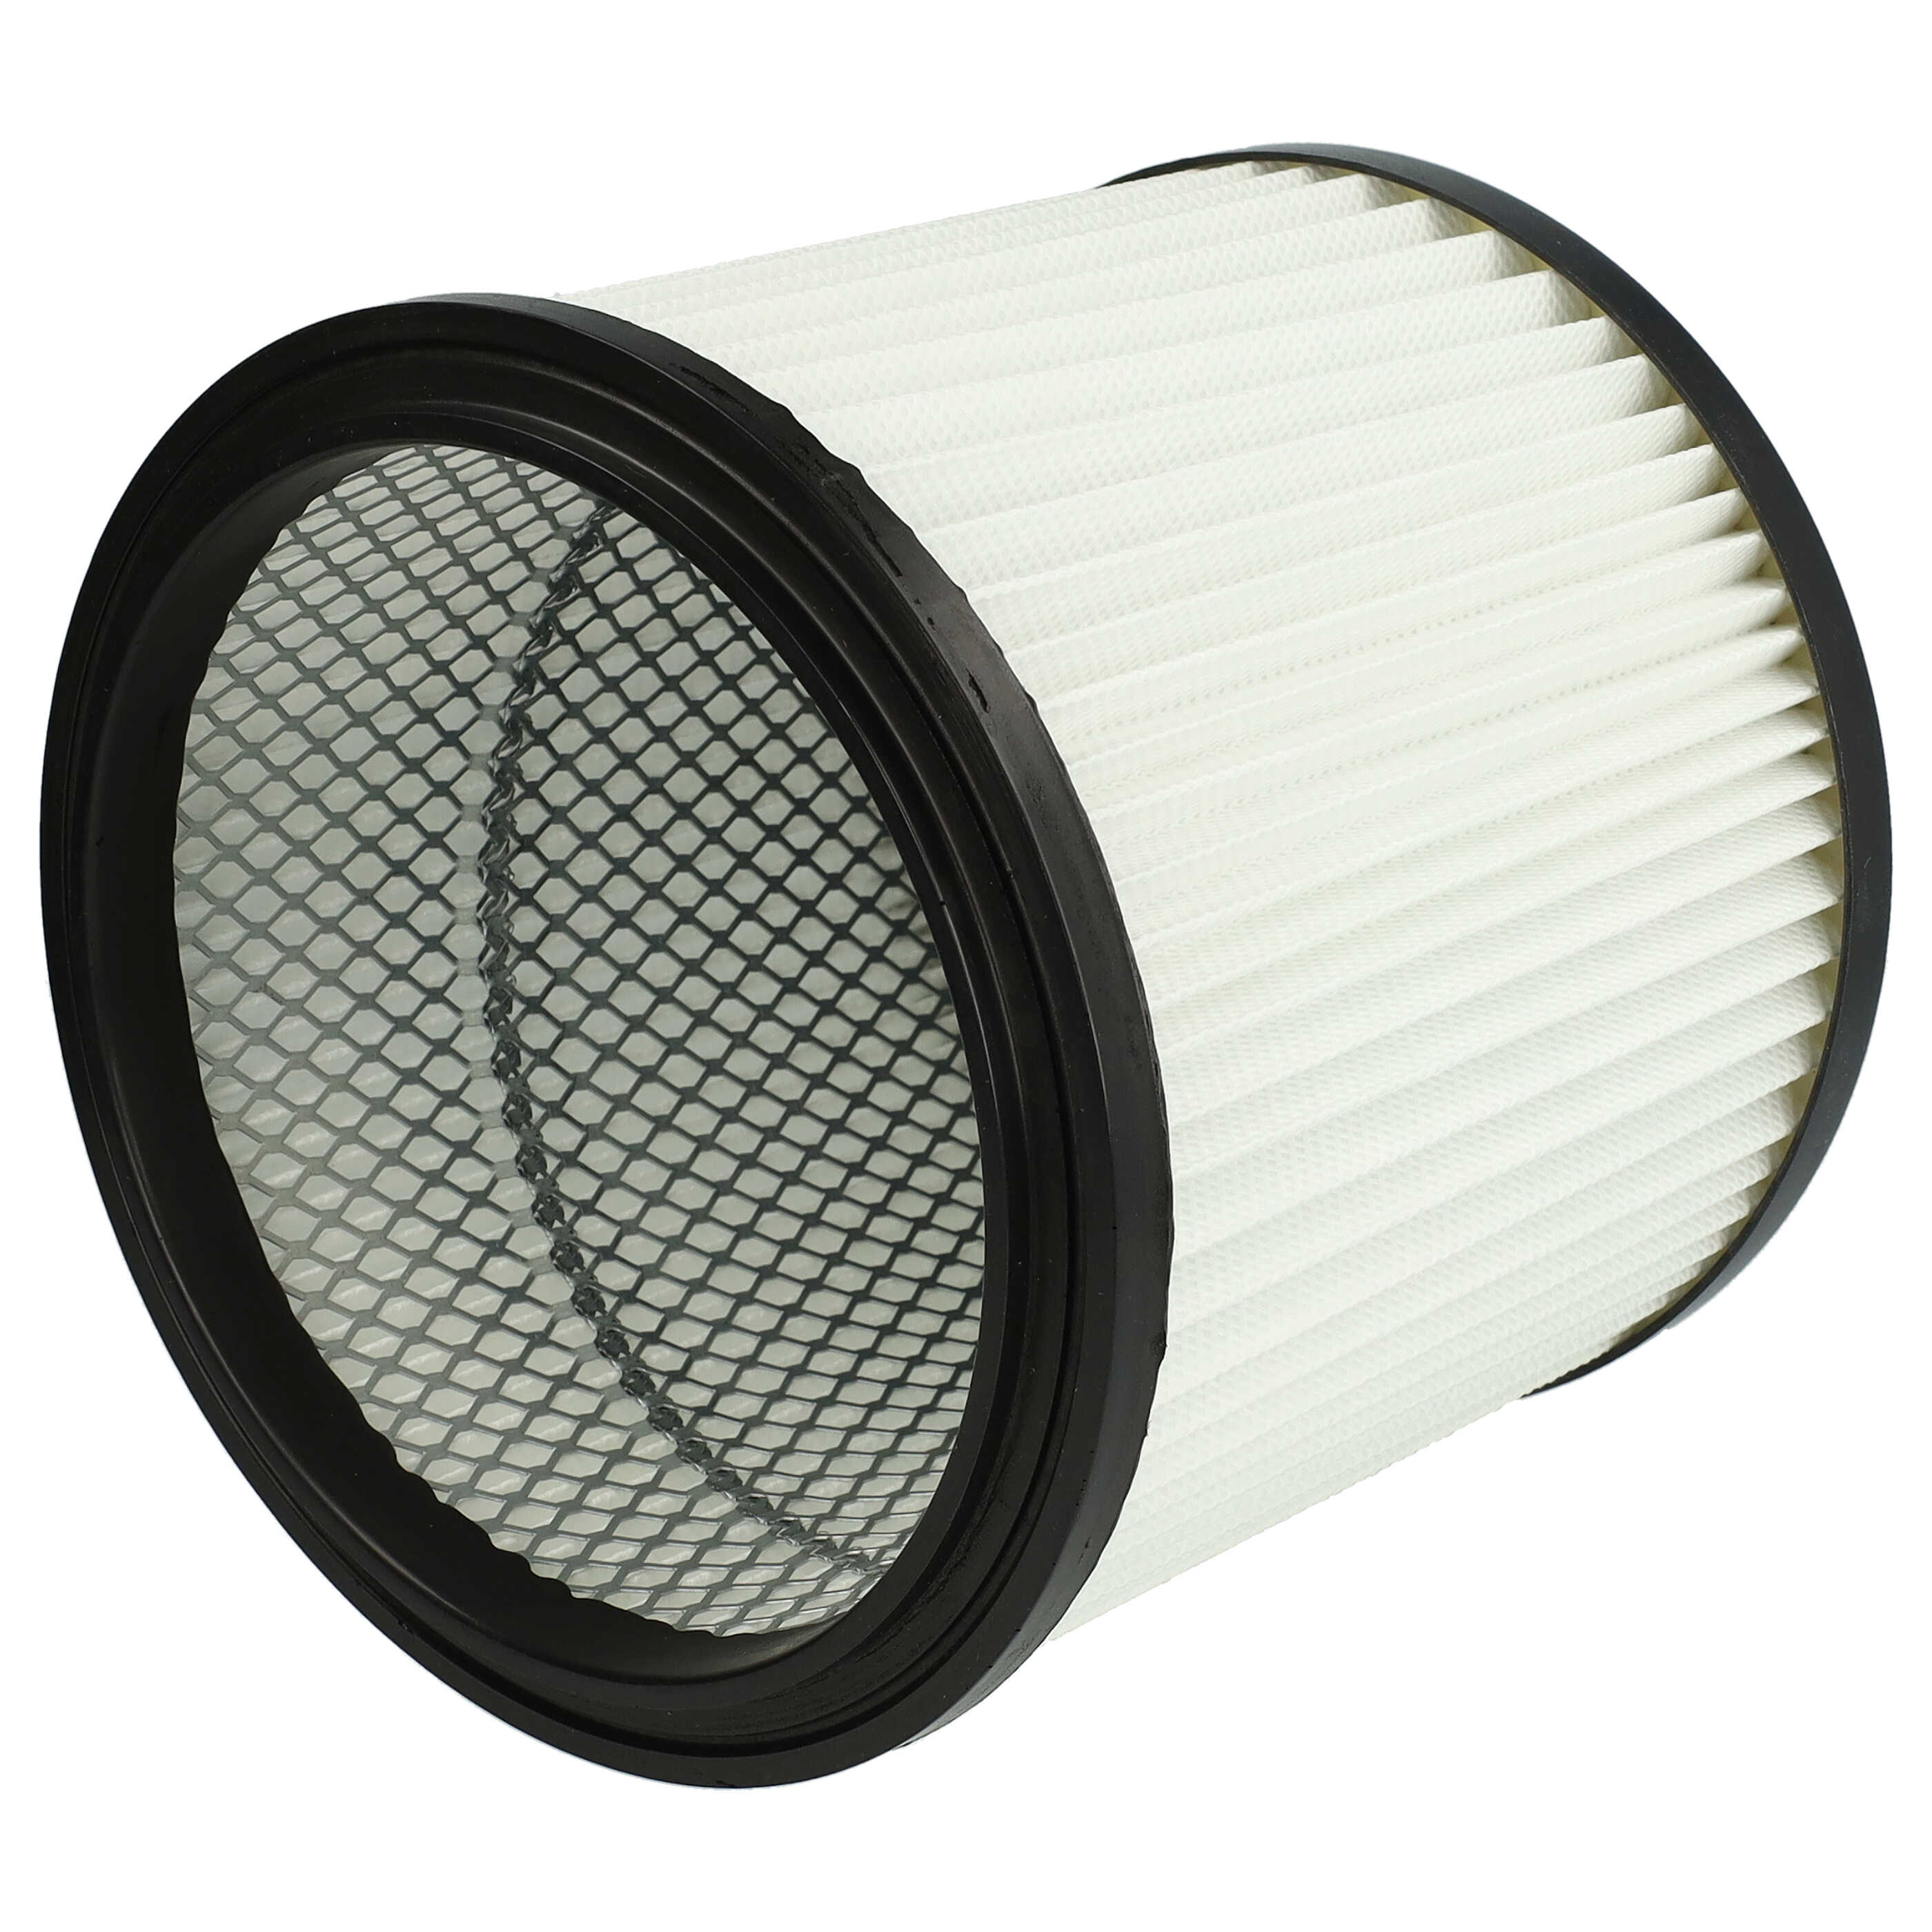 1x cartridge filter replaces Einhell 2351110 for LIVVacuum Cleaner, black / white